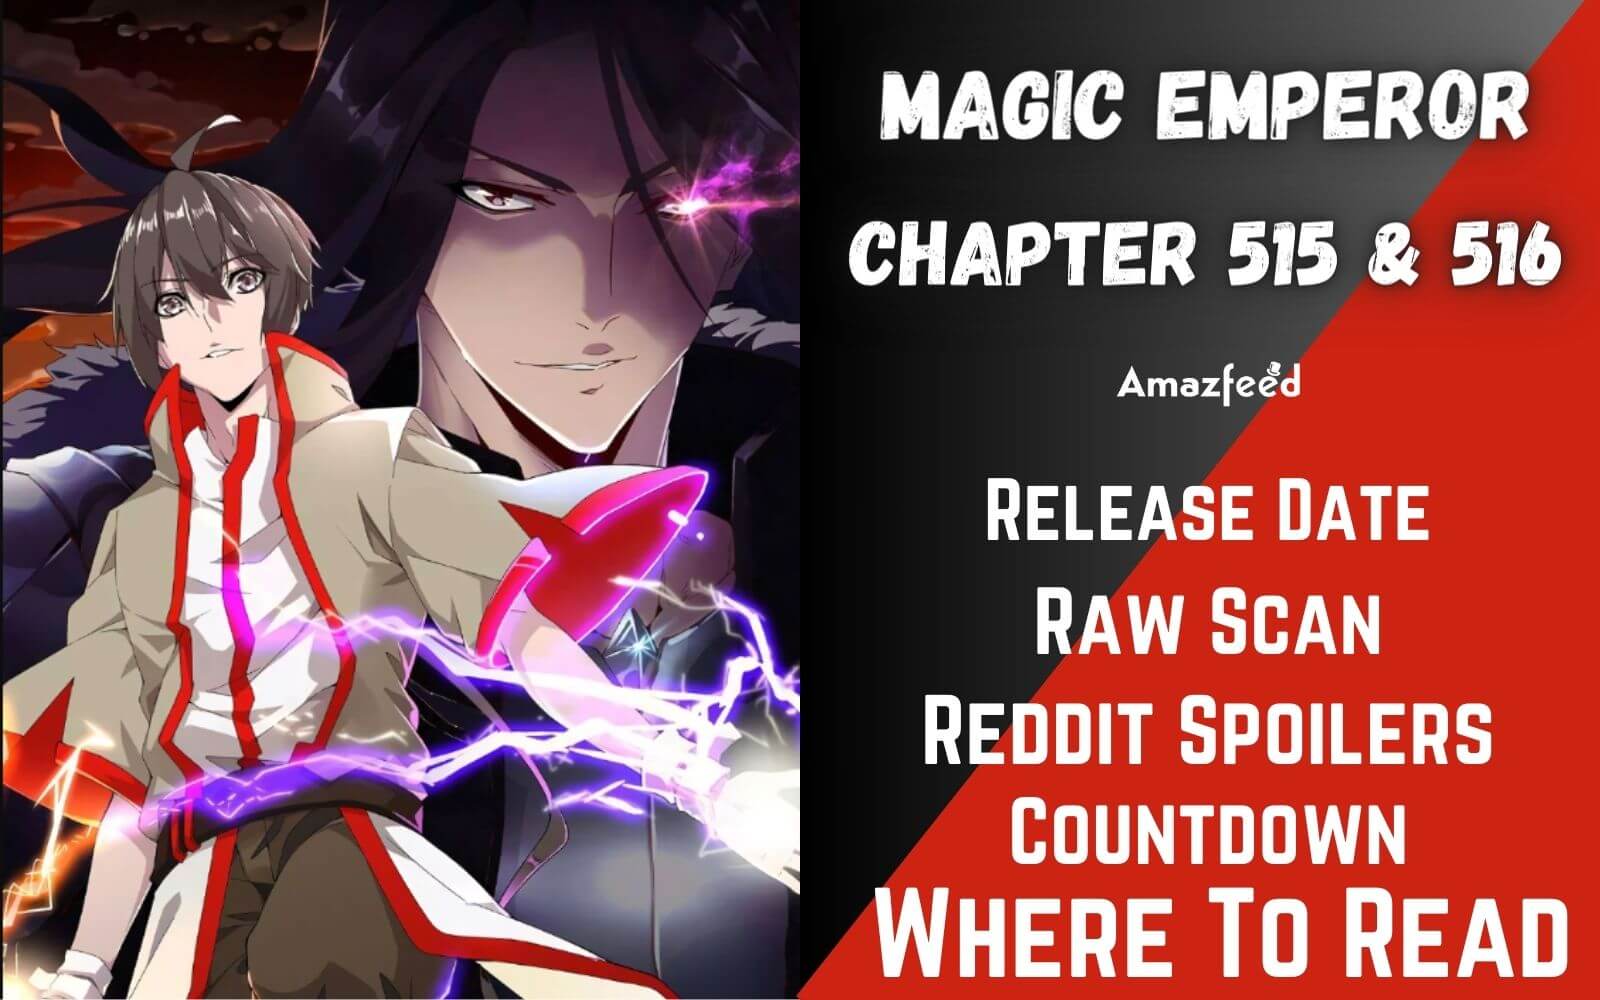 Magic Emperor Chapter 515 Spoilers, Raw Scan, Release Date, Countdown & Where to Read